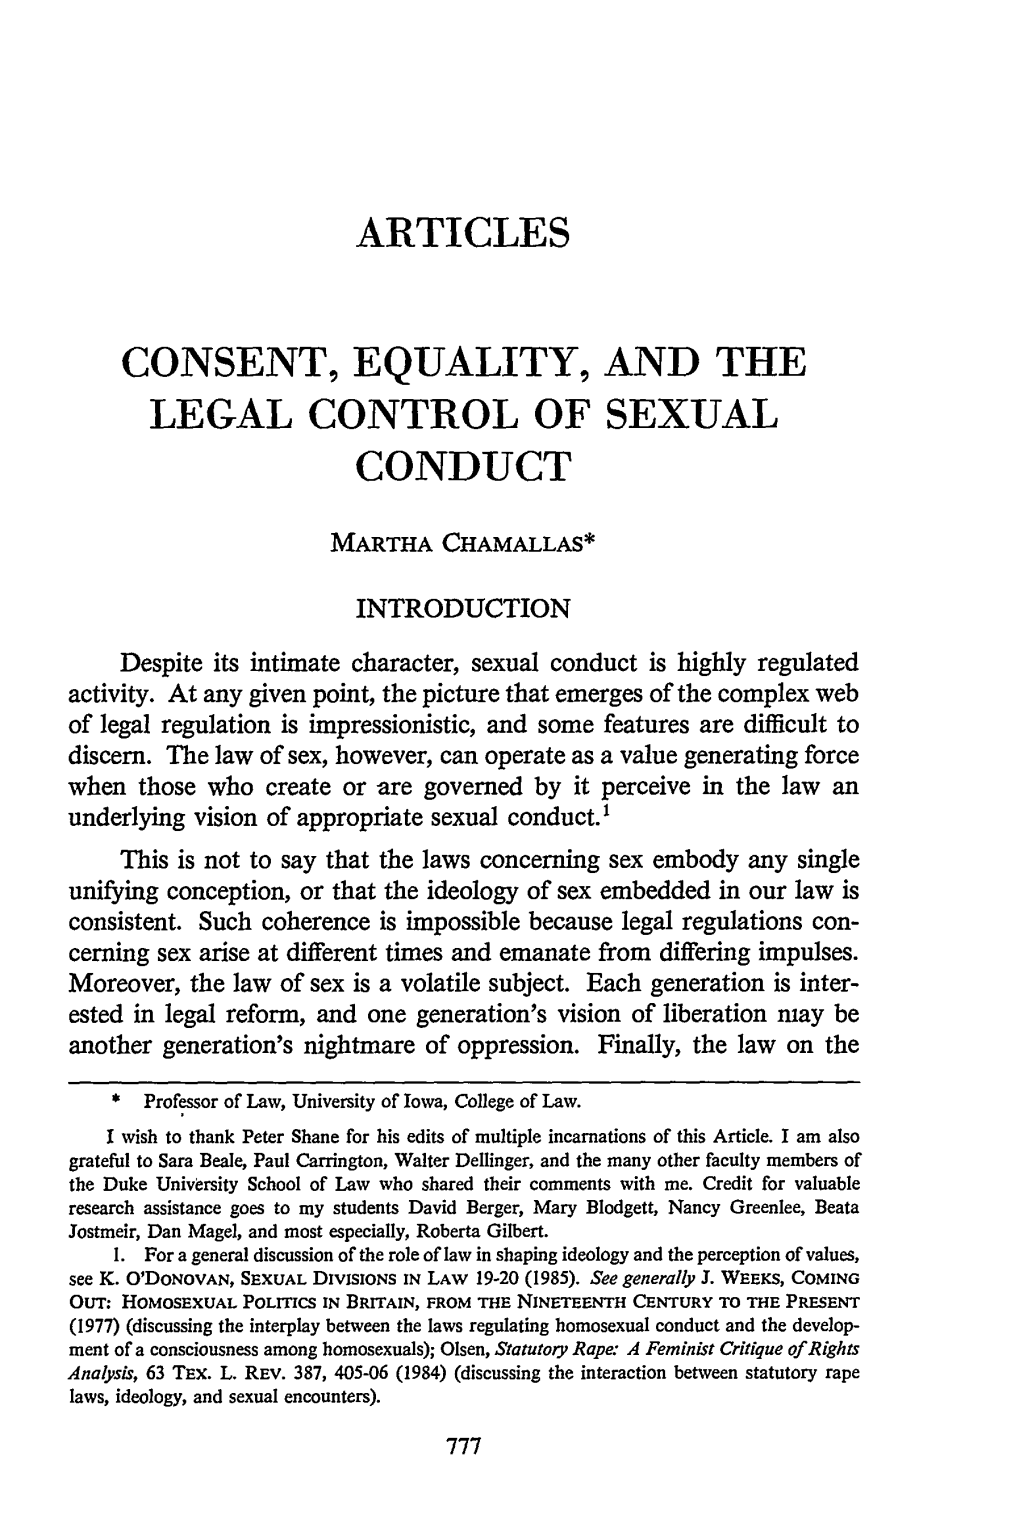 Articles Consent, Equality, and the Legal Control of Sexual Conduct